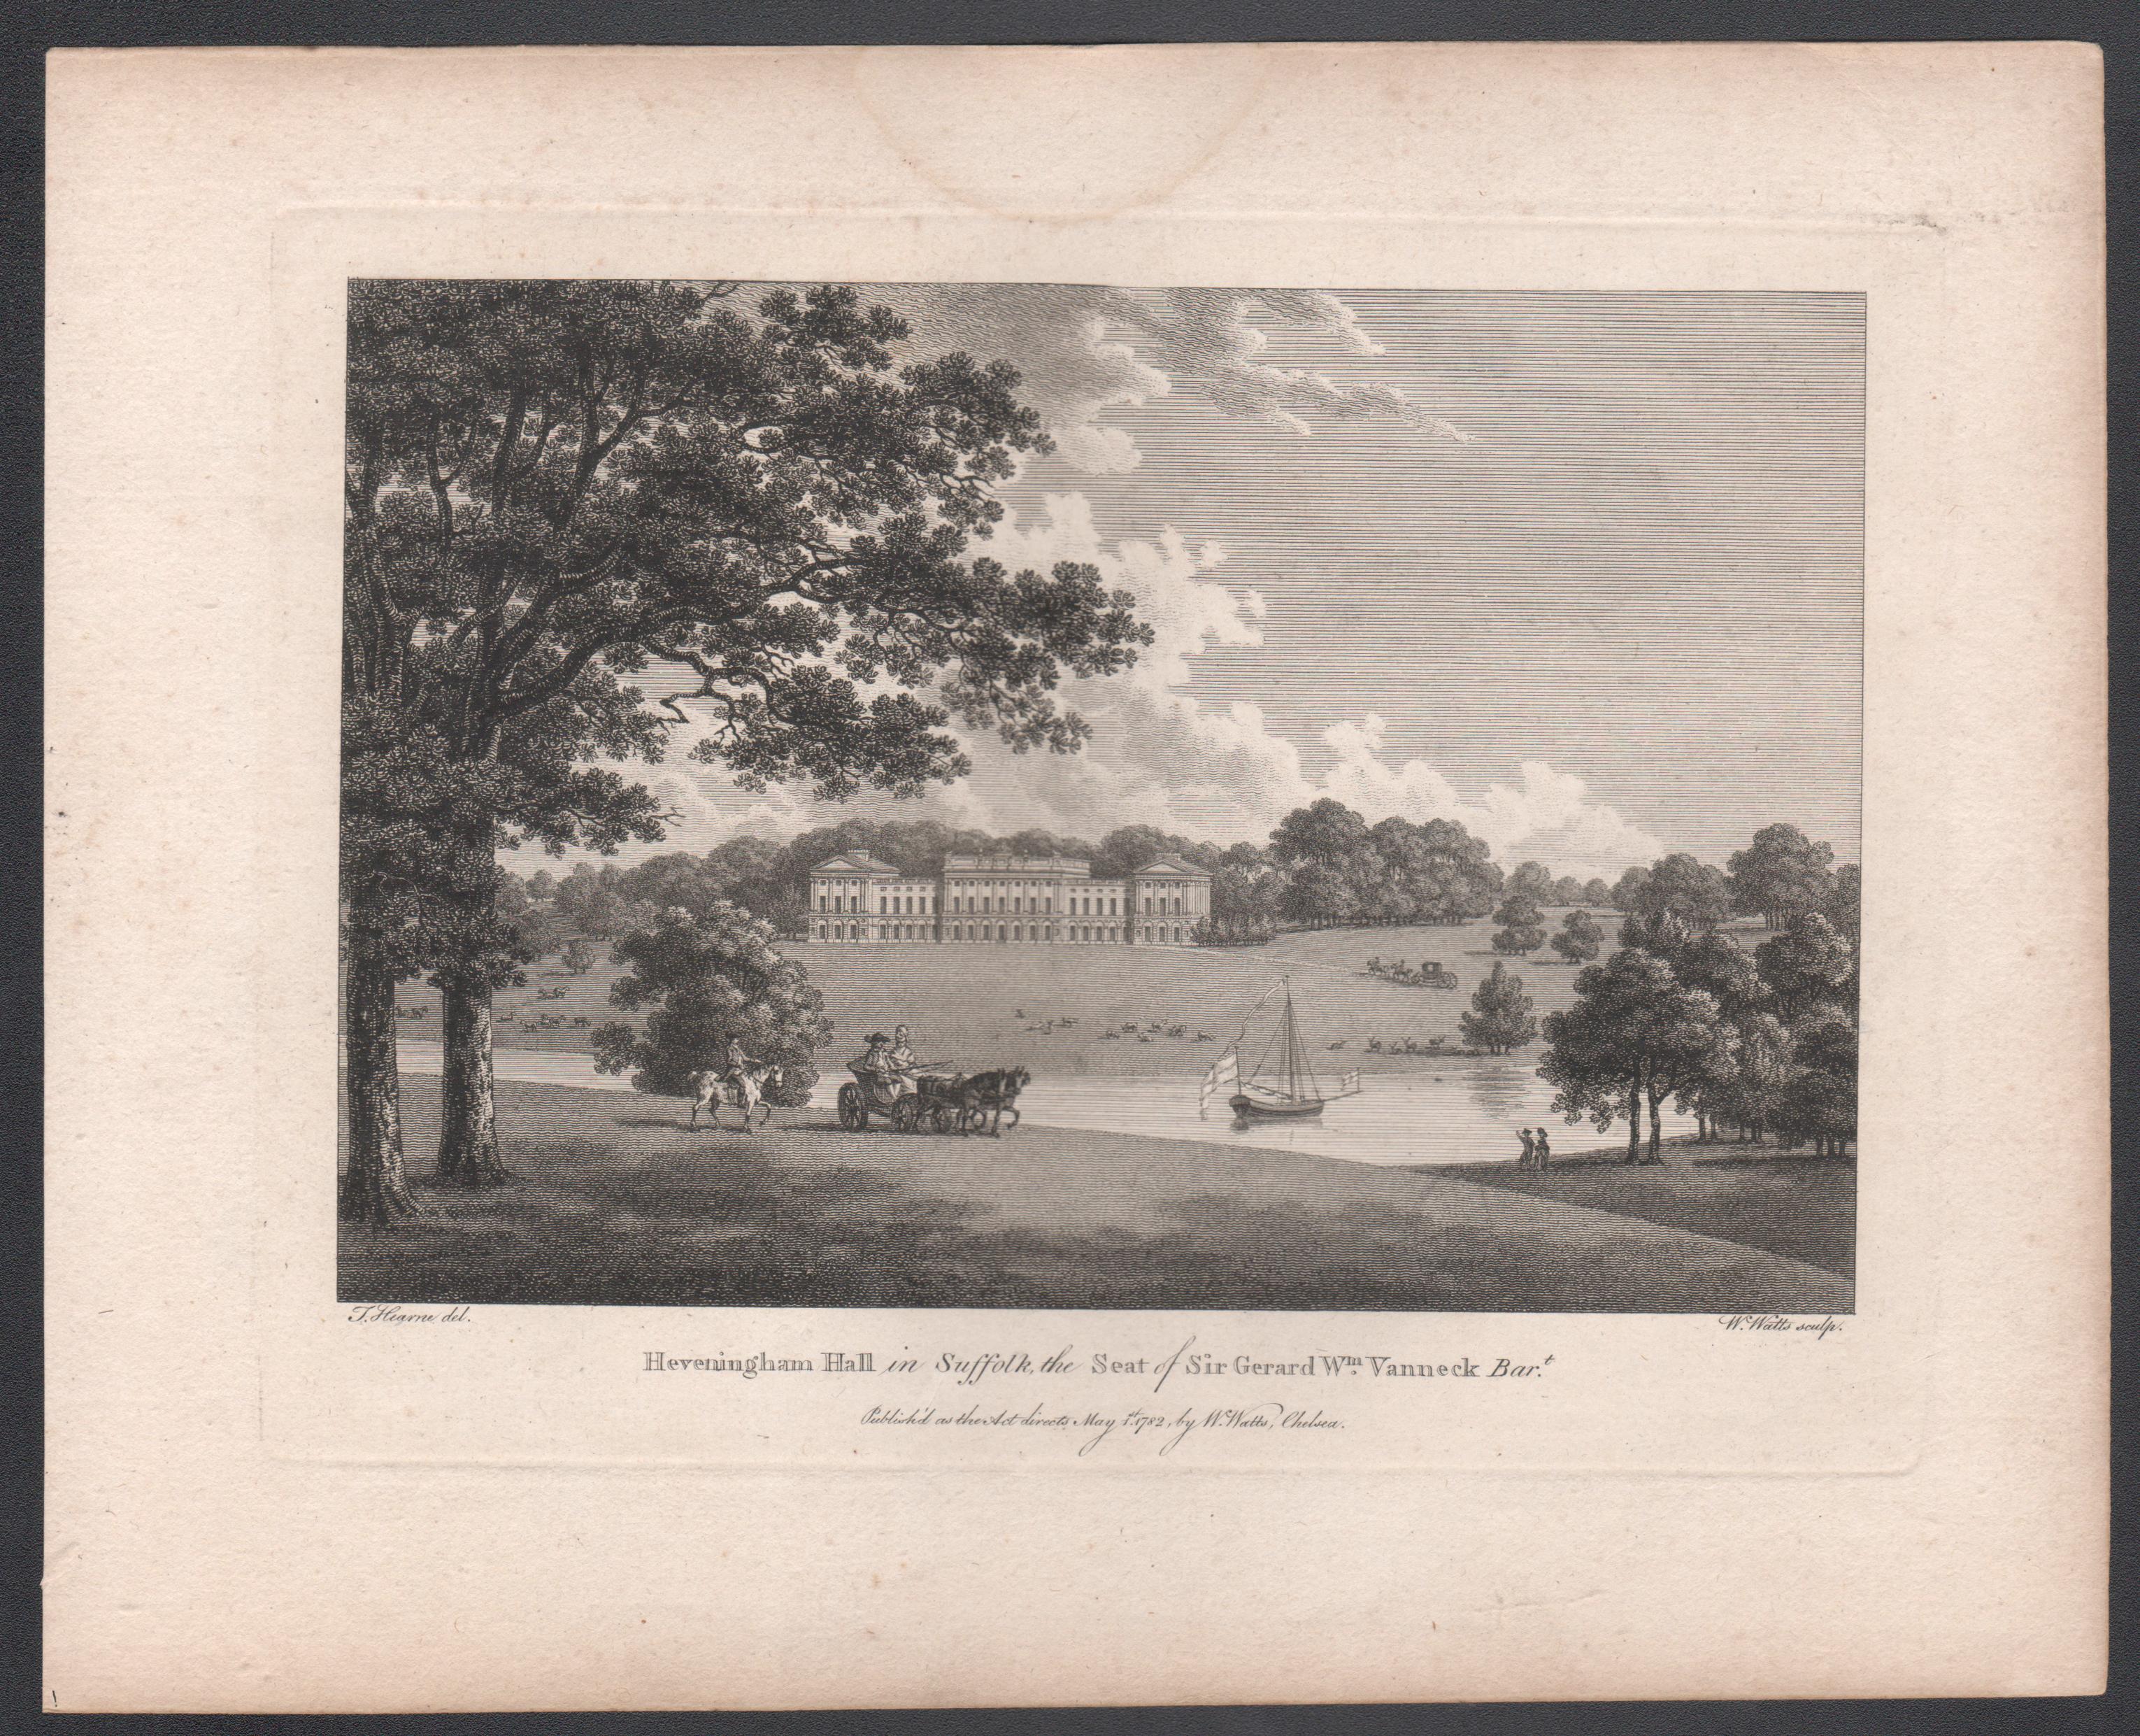 Heveningham Hall in Suffolk, 18th century English country house engraving, 1782 - Print by William Watts